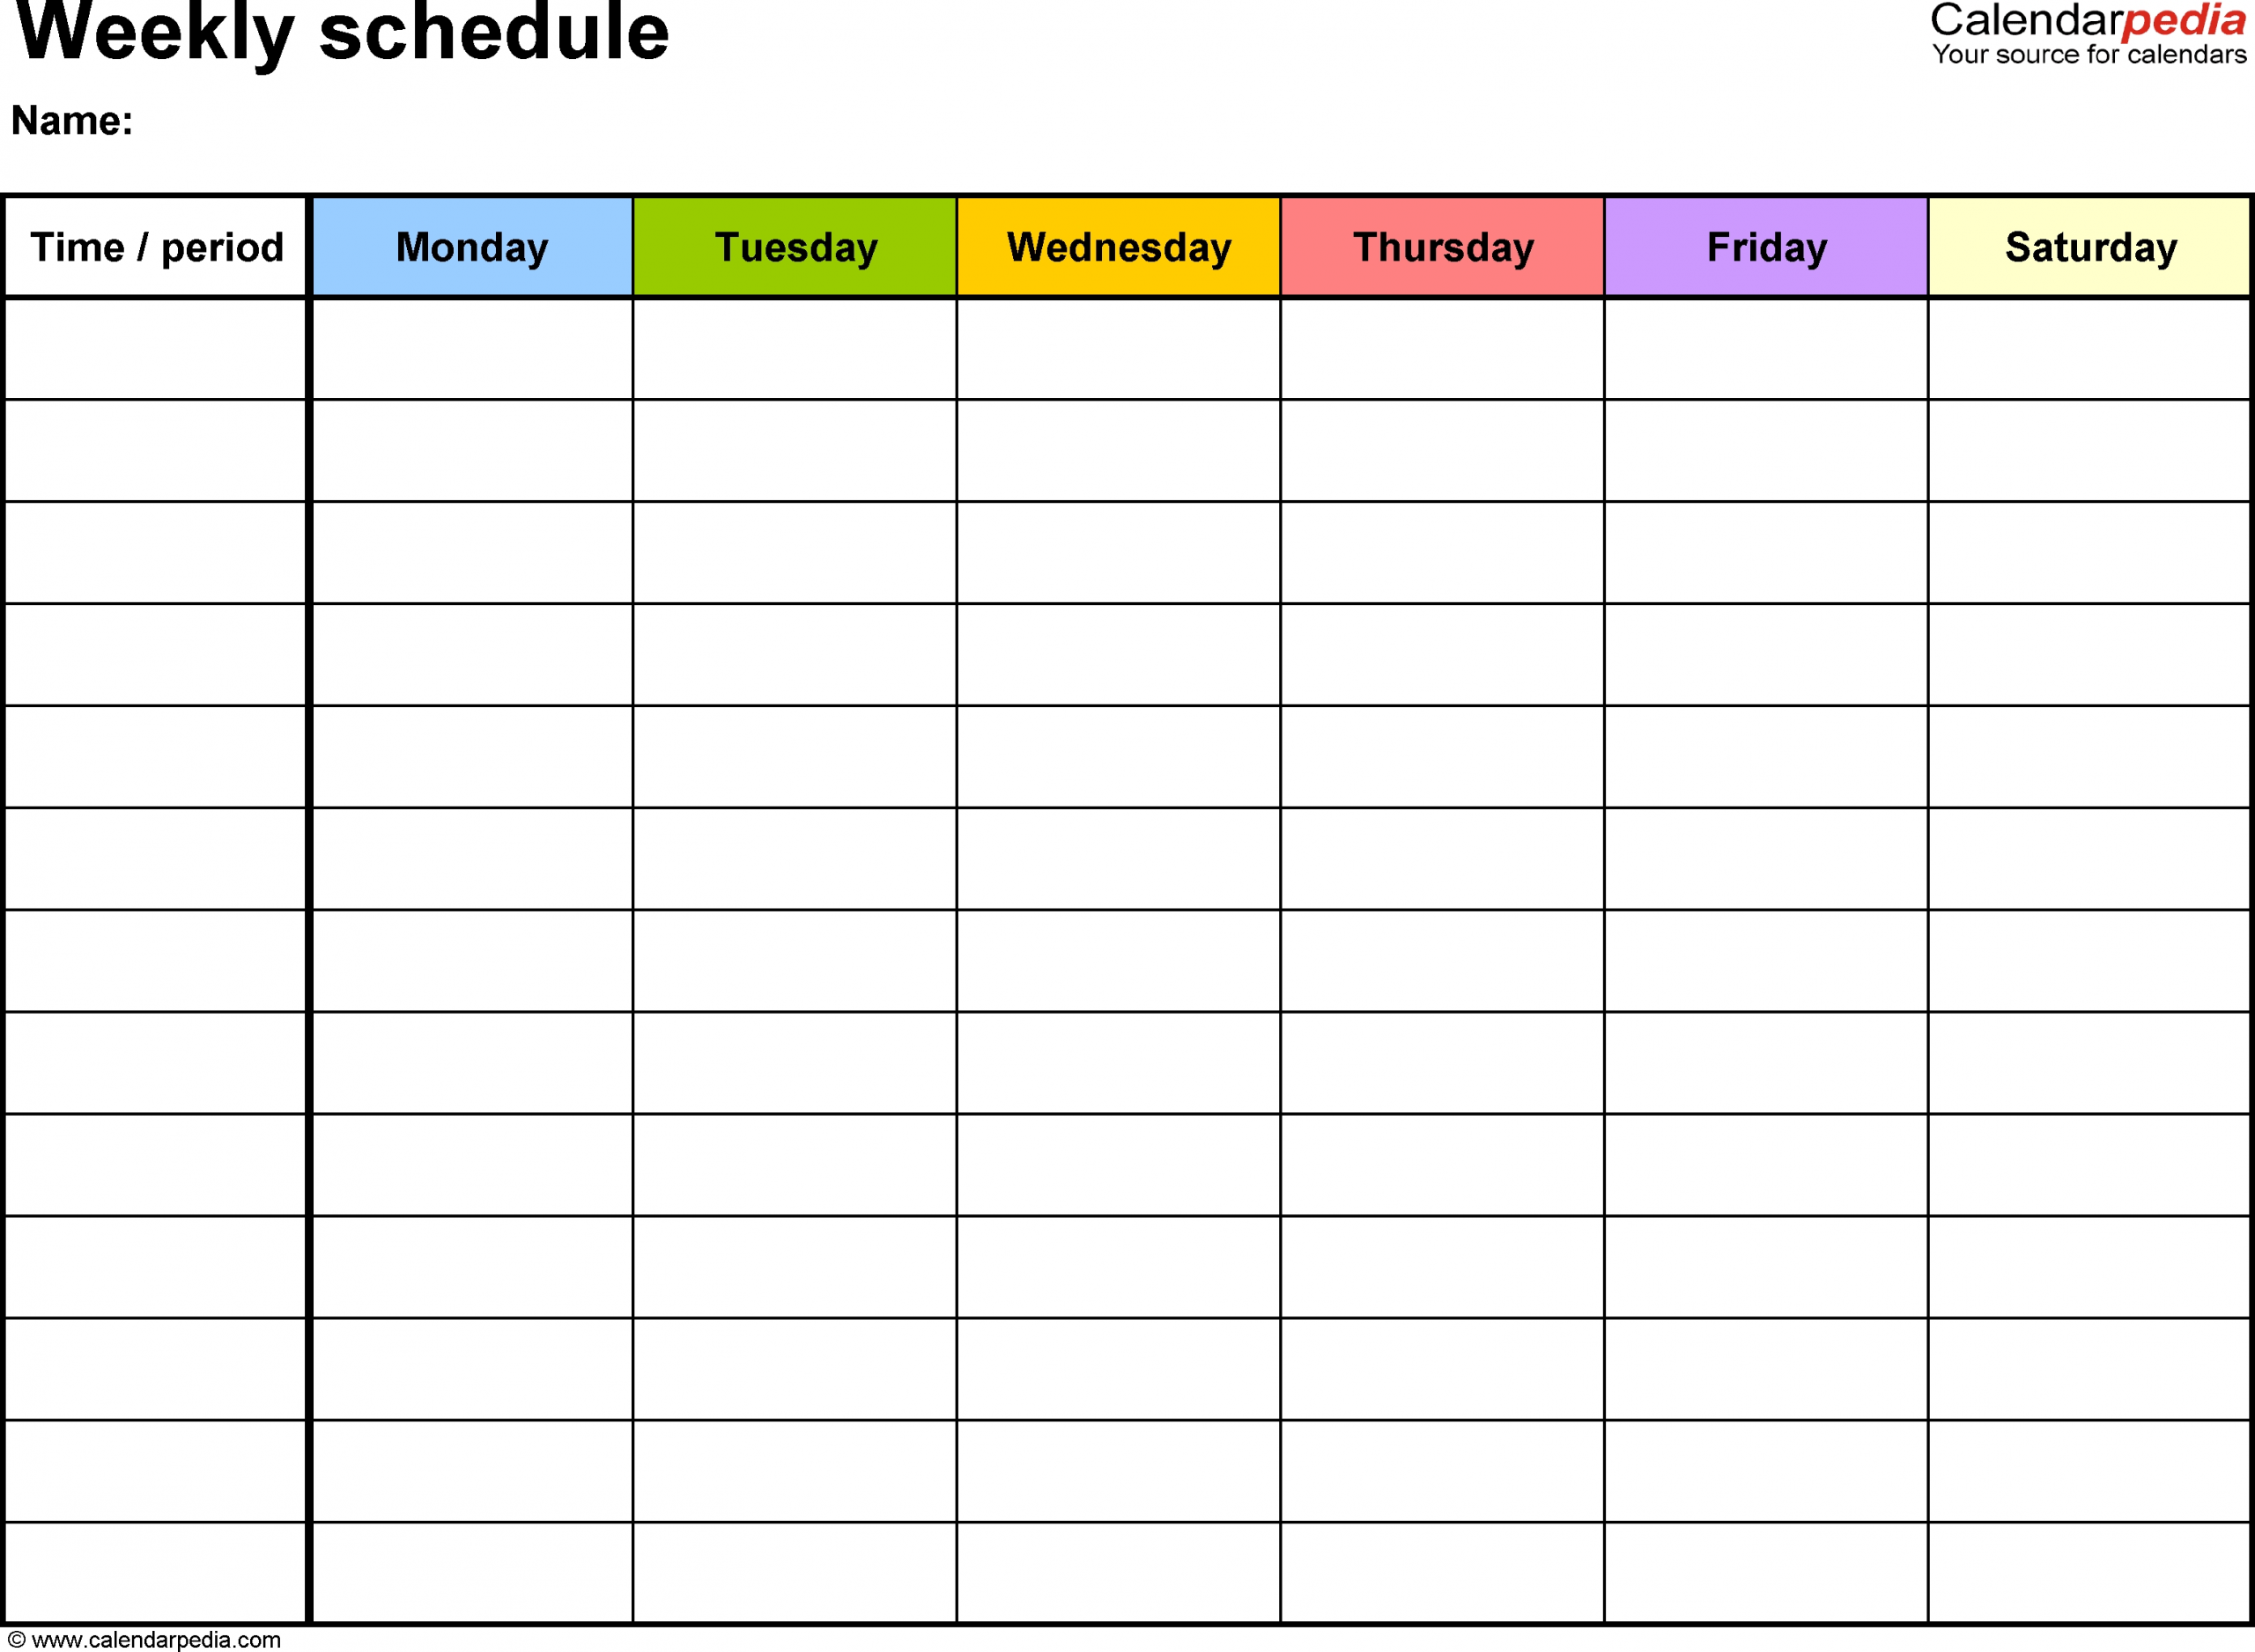 Free Weekly Schedule Templates For Word - 18 Templates regarding Fill In Blank Weekly Calendar Templates